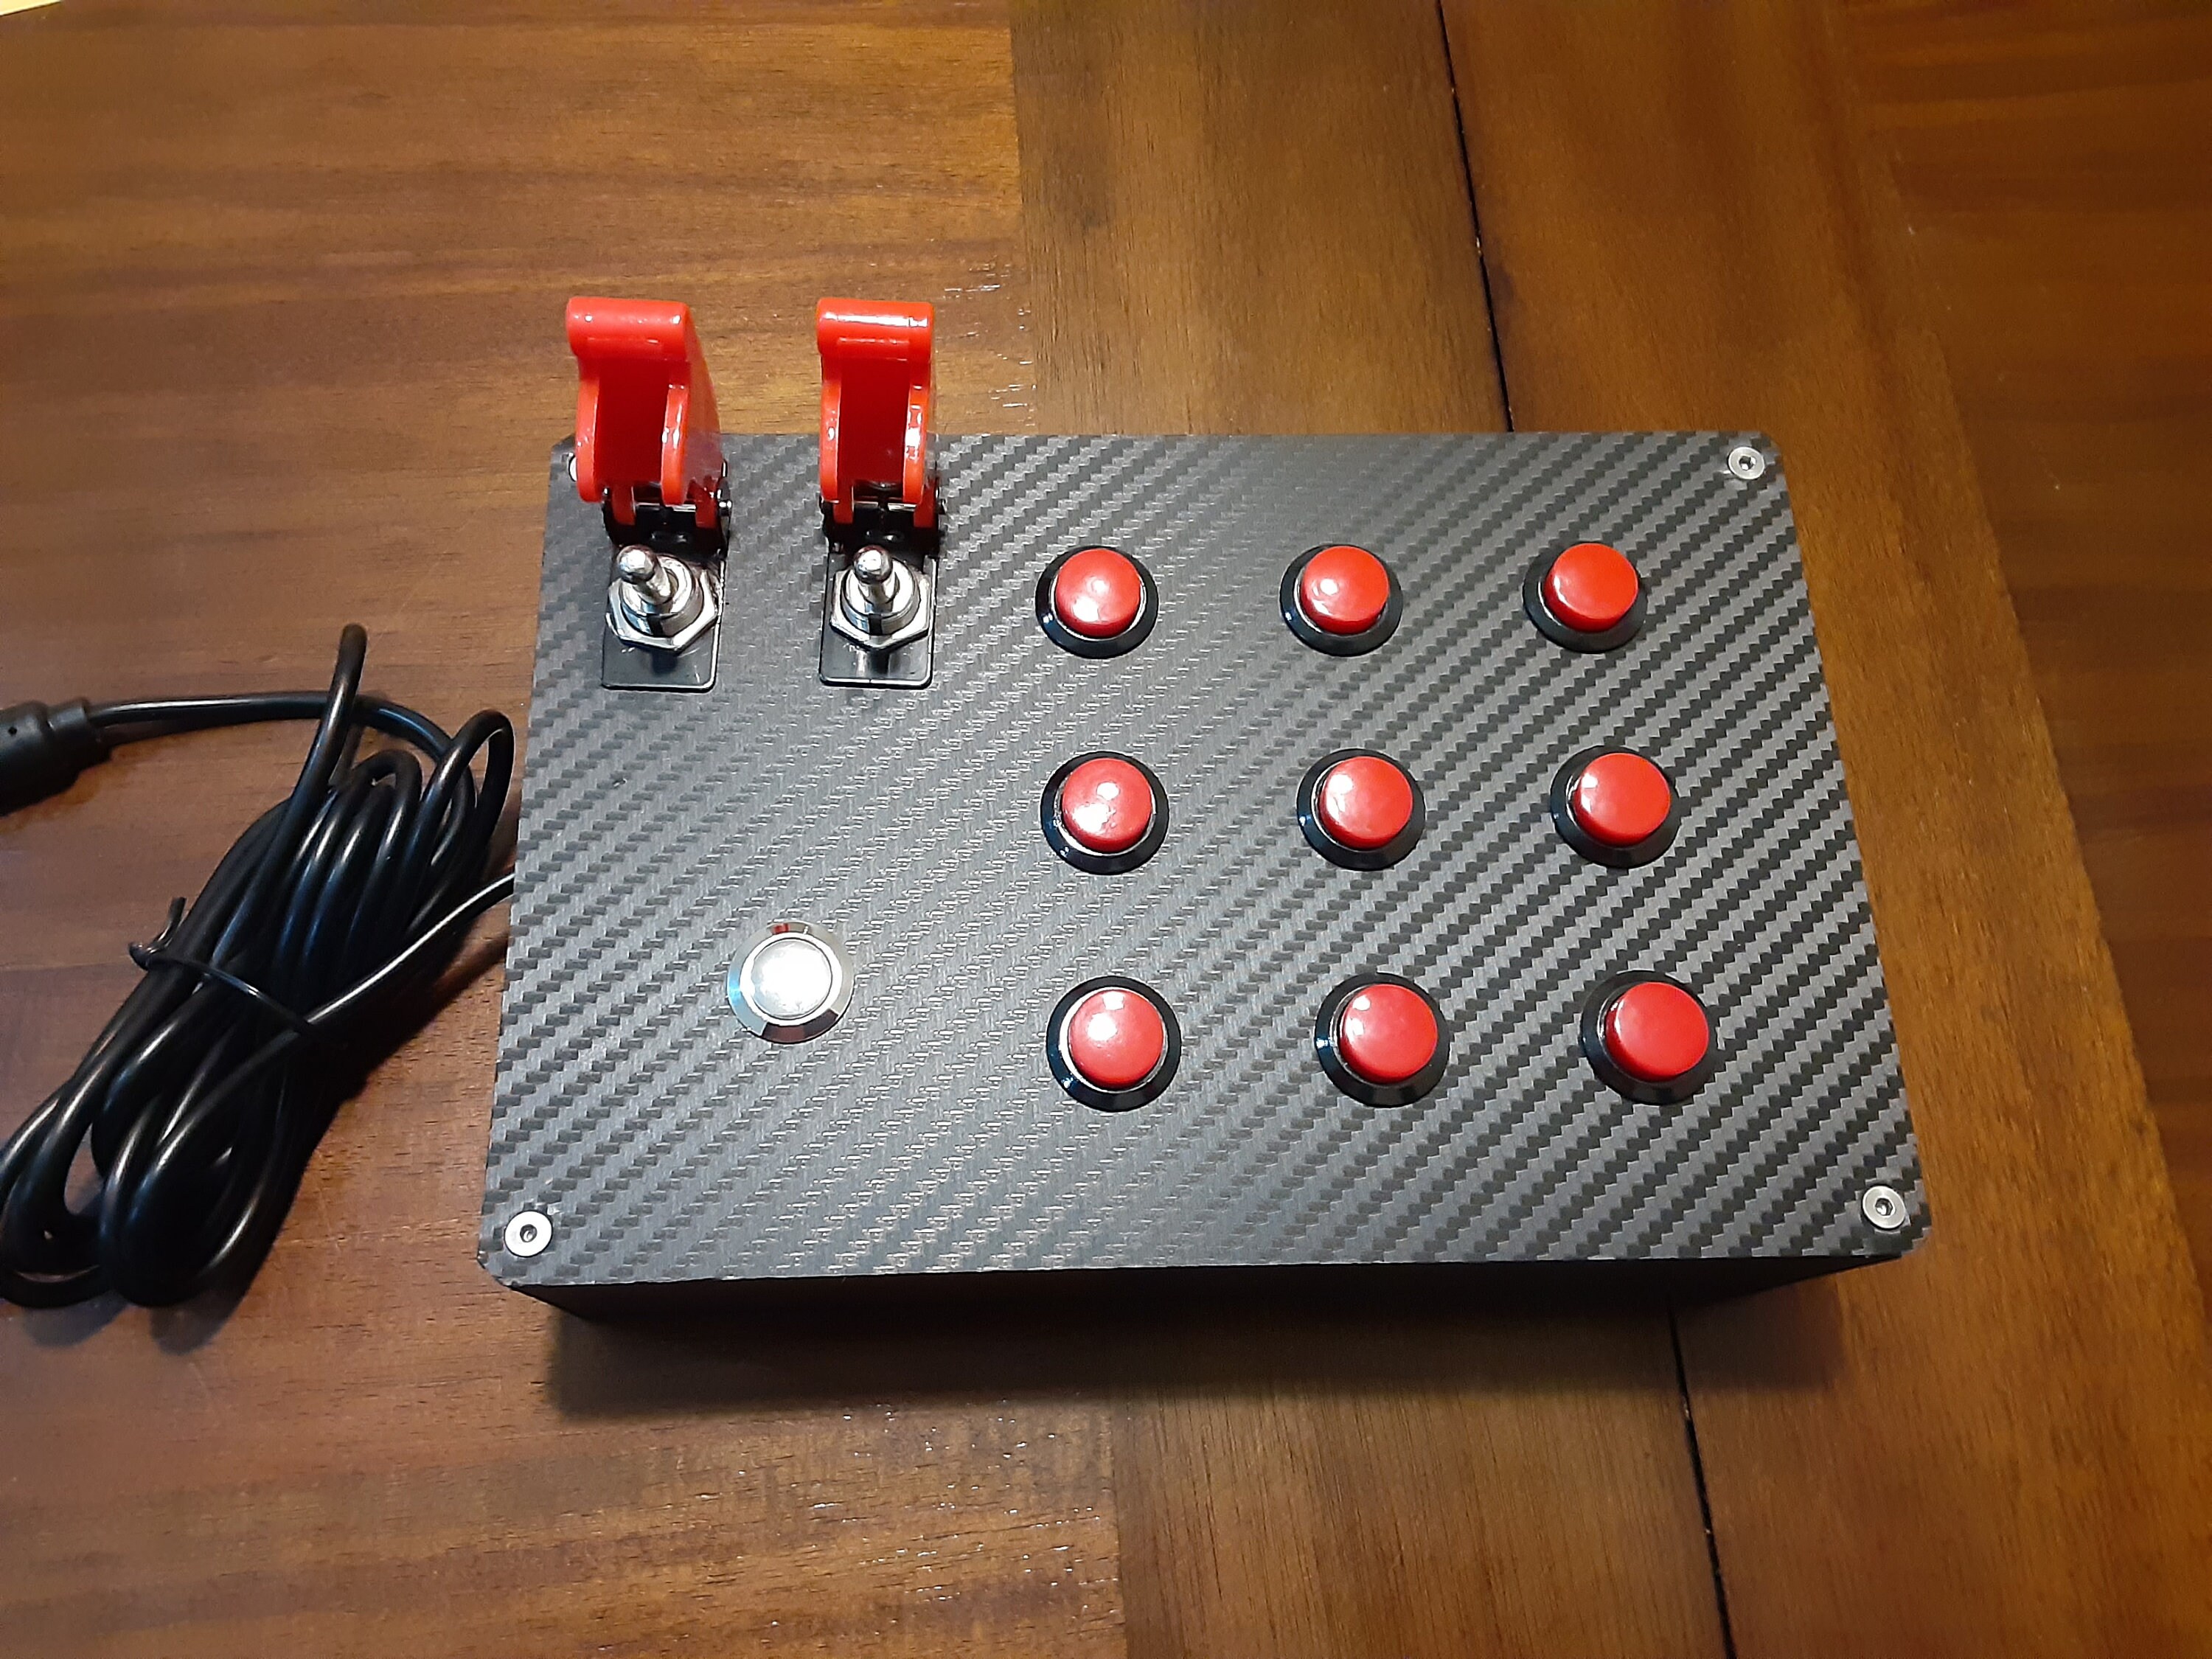  USB button box for sim racing or trucking sim with 12 buttons -  truck style - and 3d printed table mount : Handmade Products